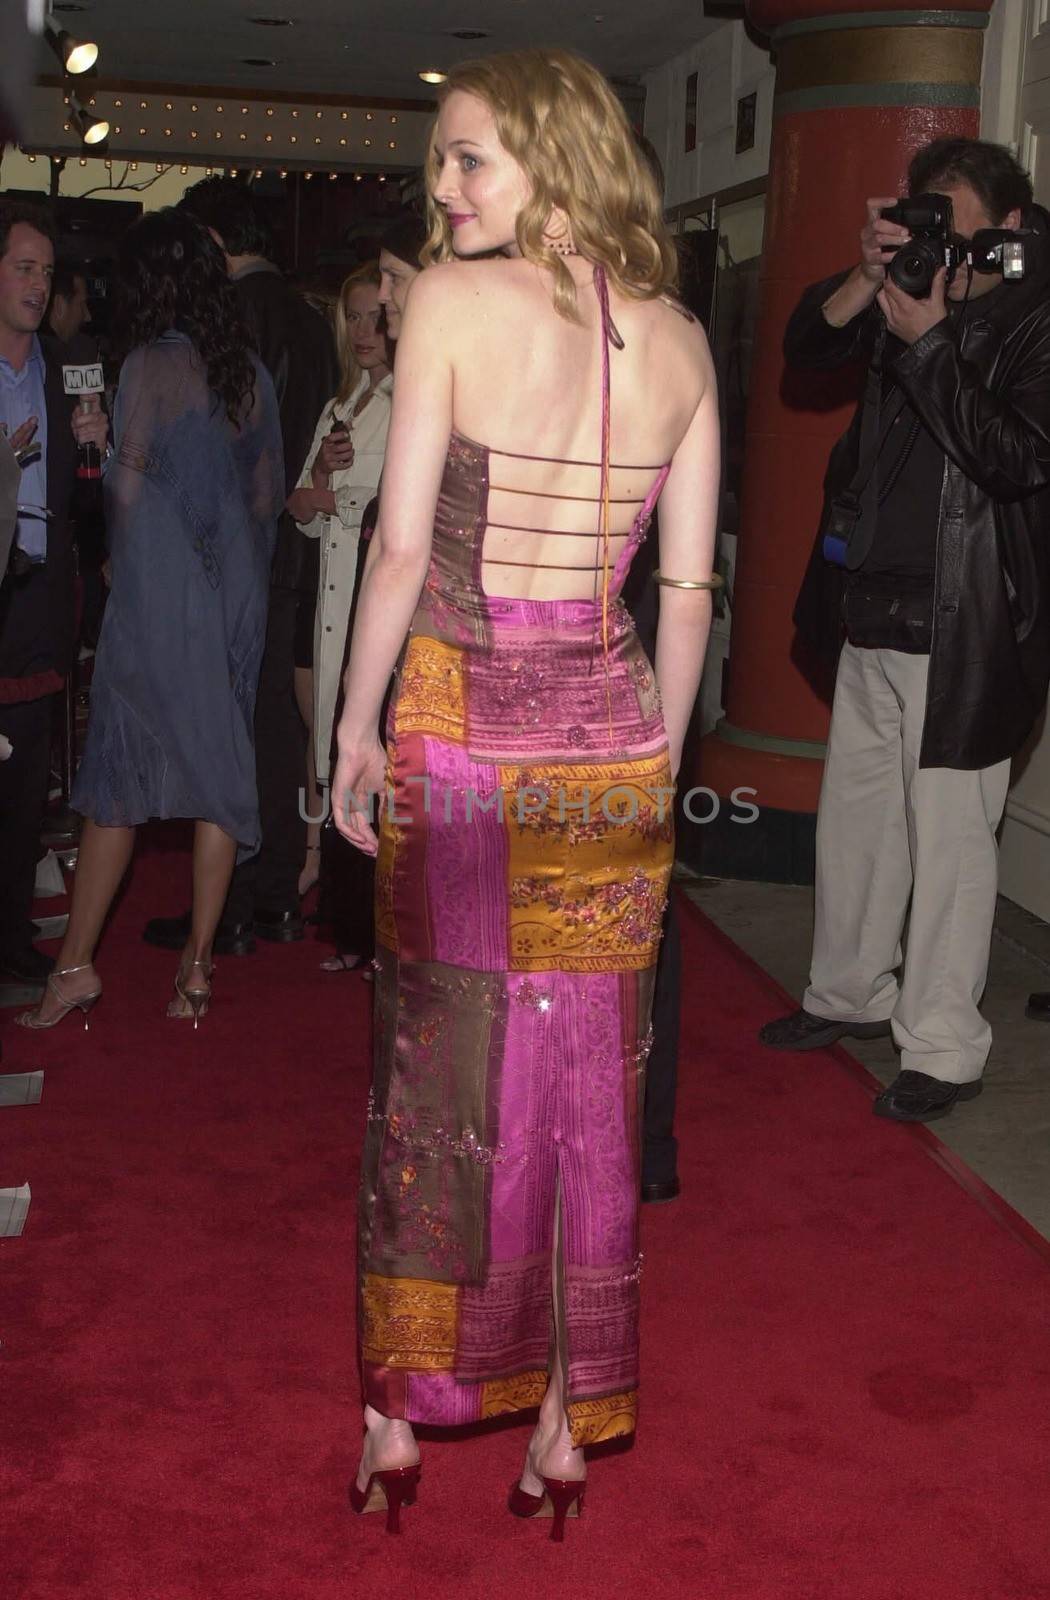 Heather Graham at the premiere of Miramax's "COMMITTED" in Westwood, 04-18-00